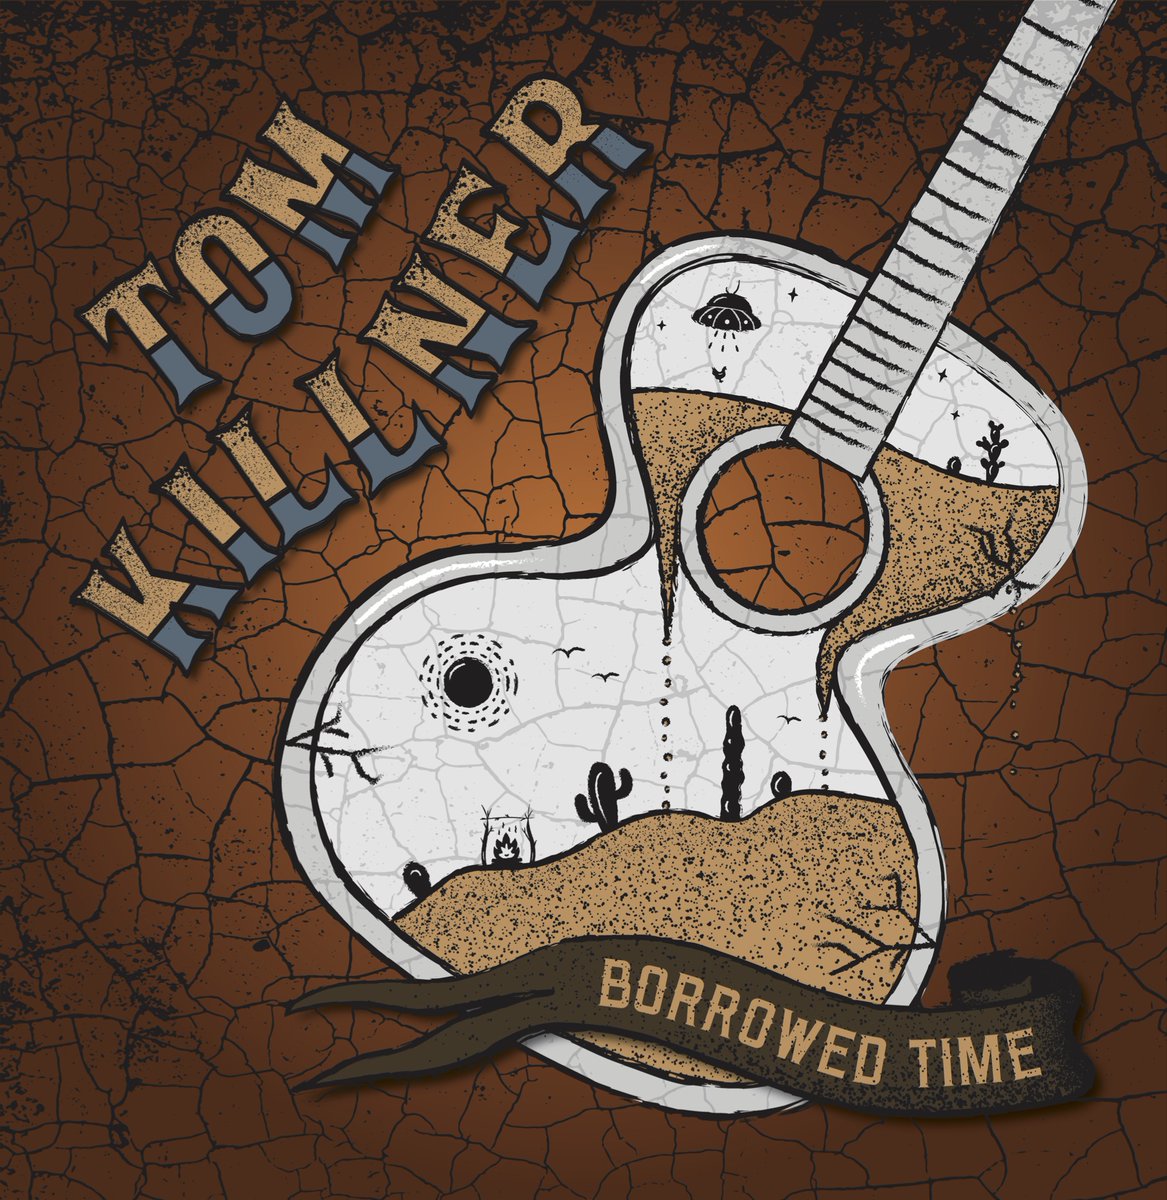 The new Tom Killner album receives a stellar review from @EmergingRock... 'The blend is fresh and intriguing...that make this album one of my albums of the year already! 9/10.' Read: bit.ly/4df50up Buy CD/vinyl now direct from Tom: tomkillner.com